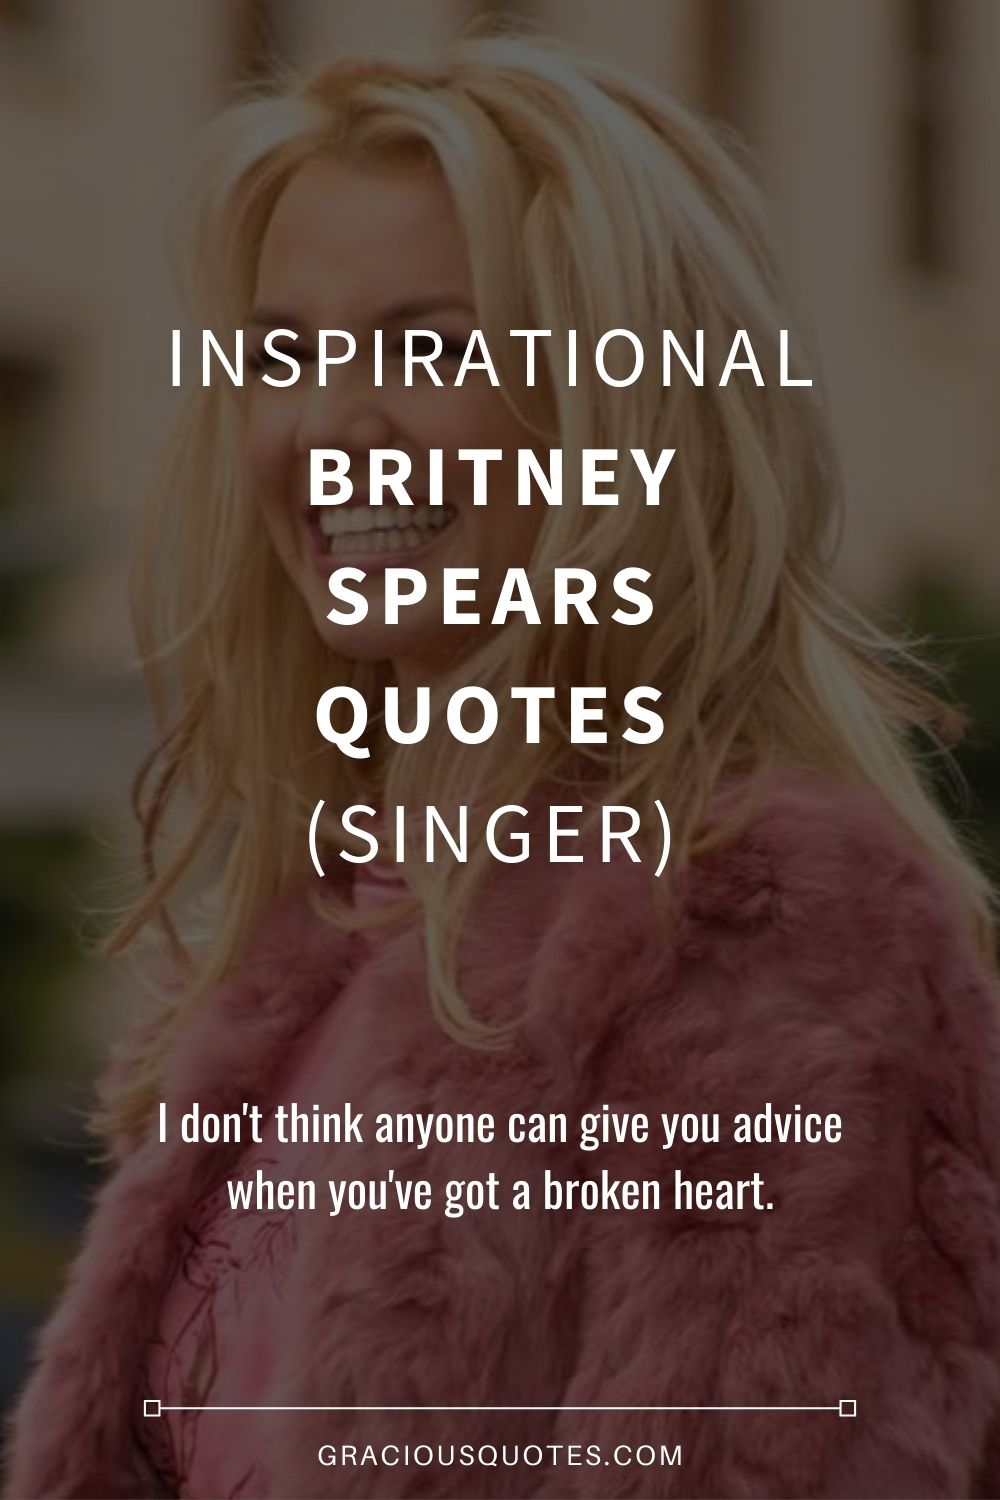 Inspirational Britney Spears Quotes (SINGER) - Gracious Quotes (EDITED)